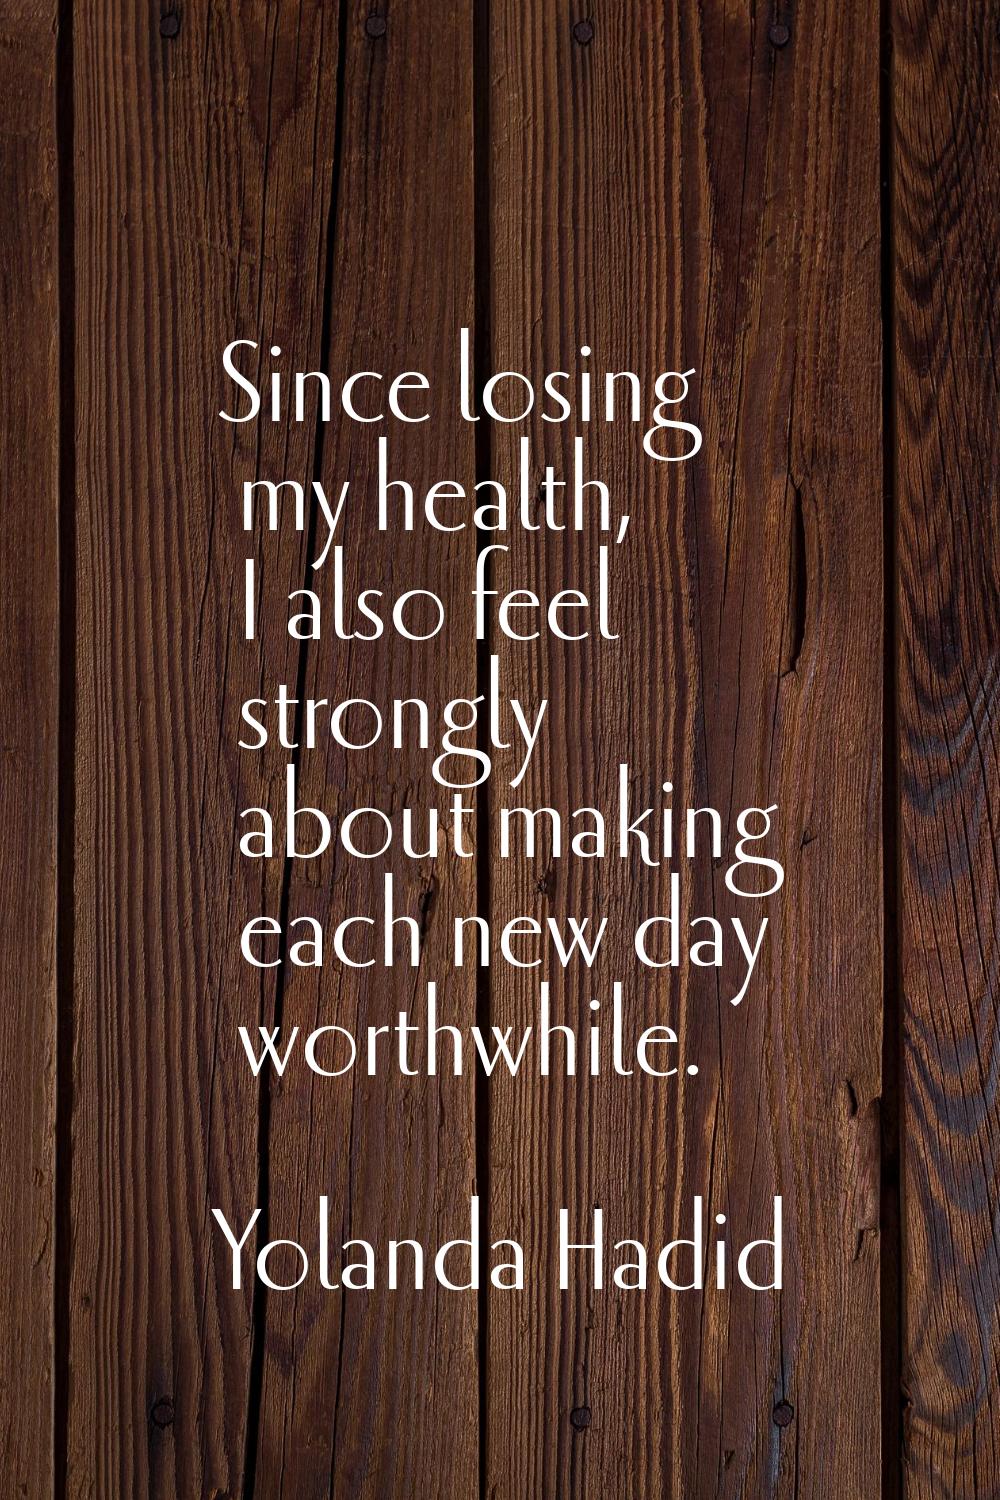 Since losing my health, I also feel strongly about making each new day worthwhile.